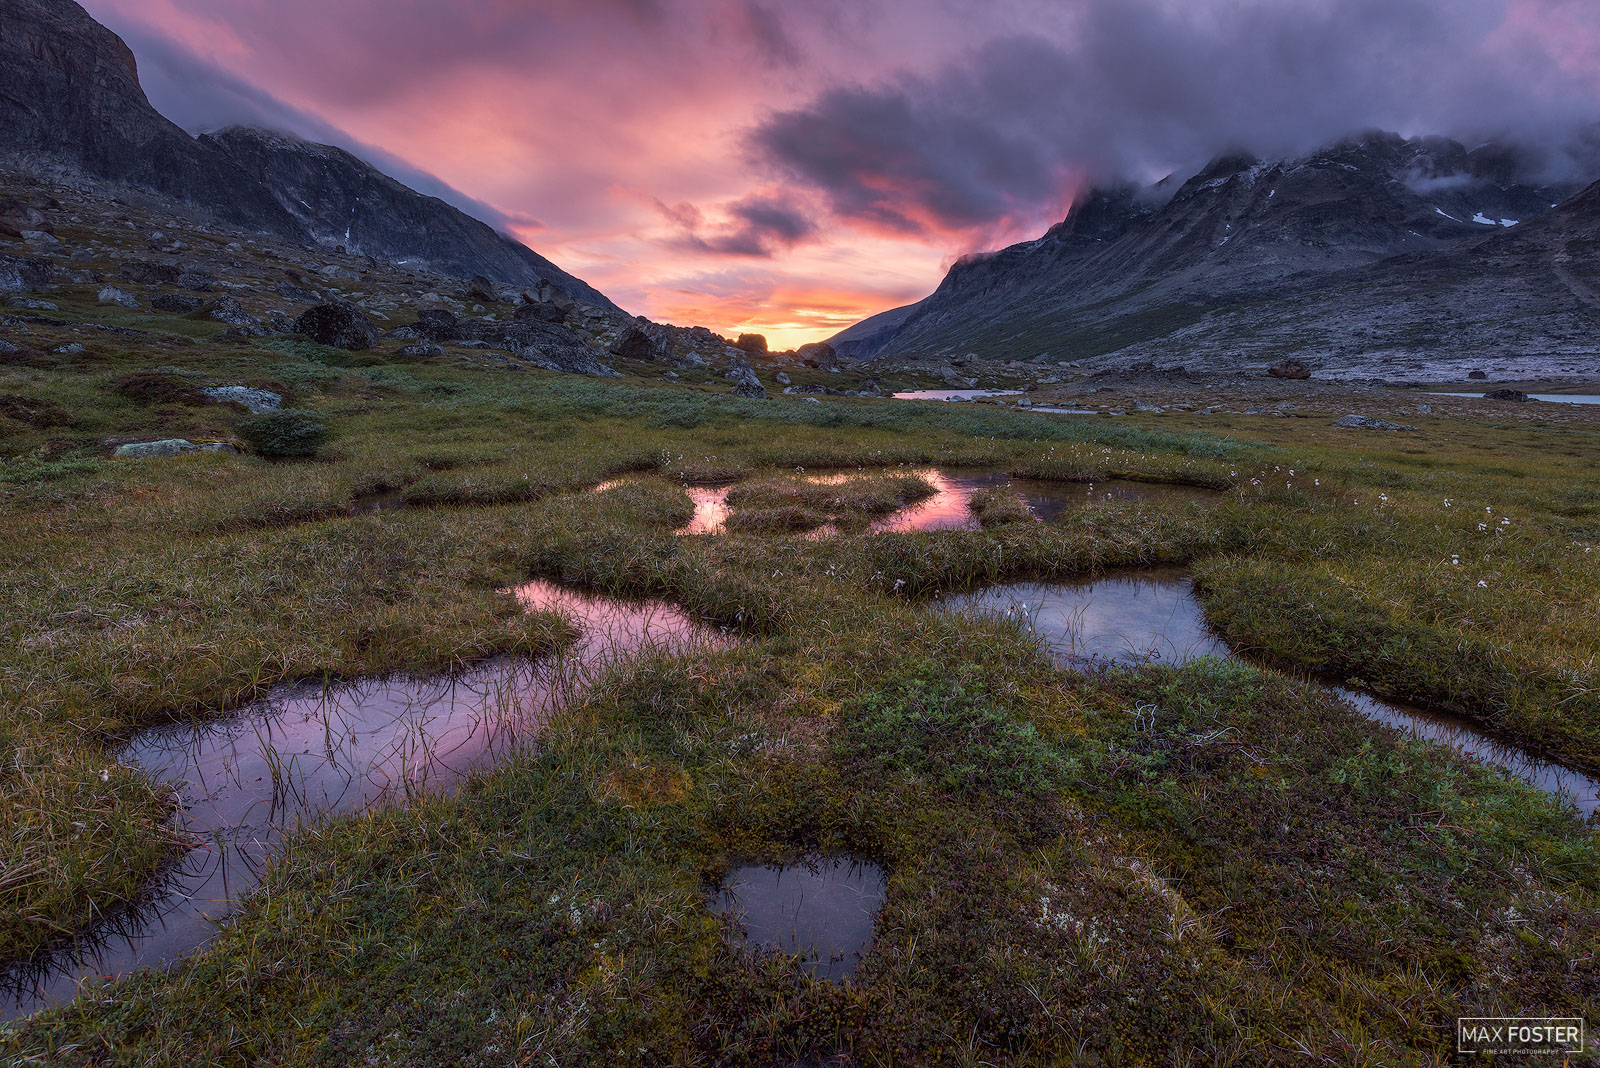 Bring nature into your home with Afterglow, Max Foster's limited edition photography print of a valley in Southern Greenland...